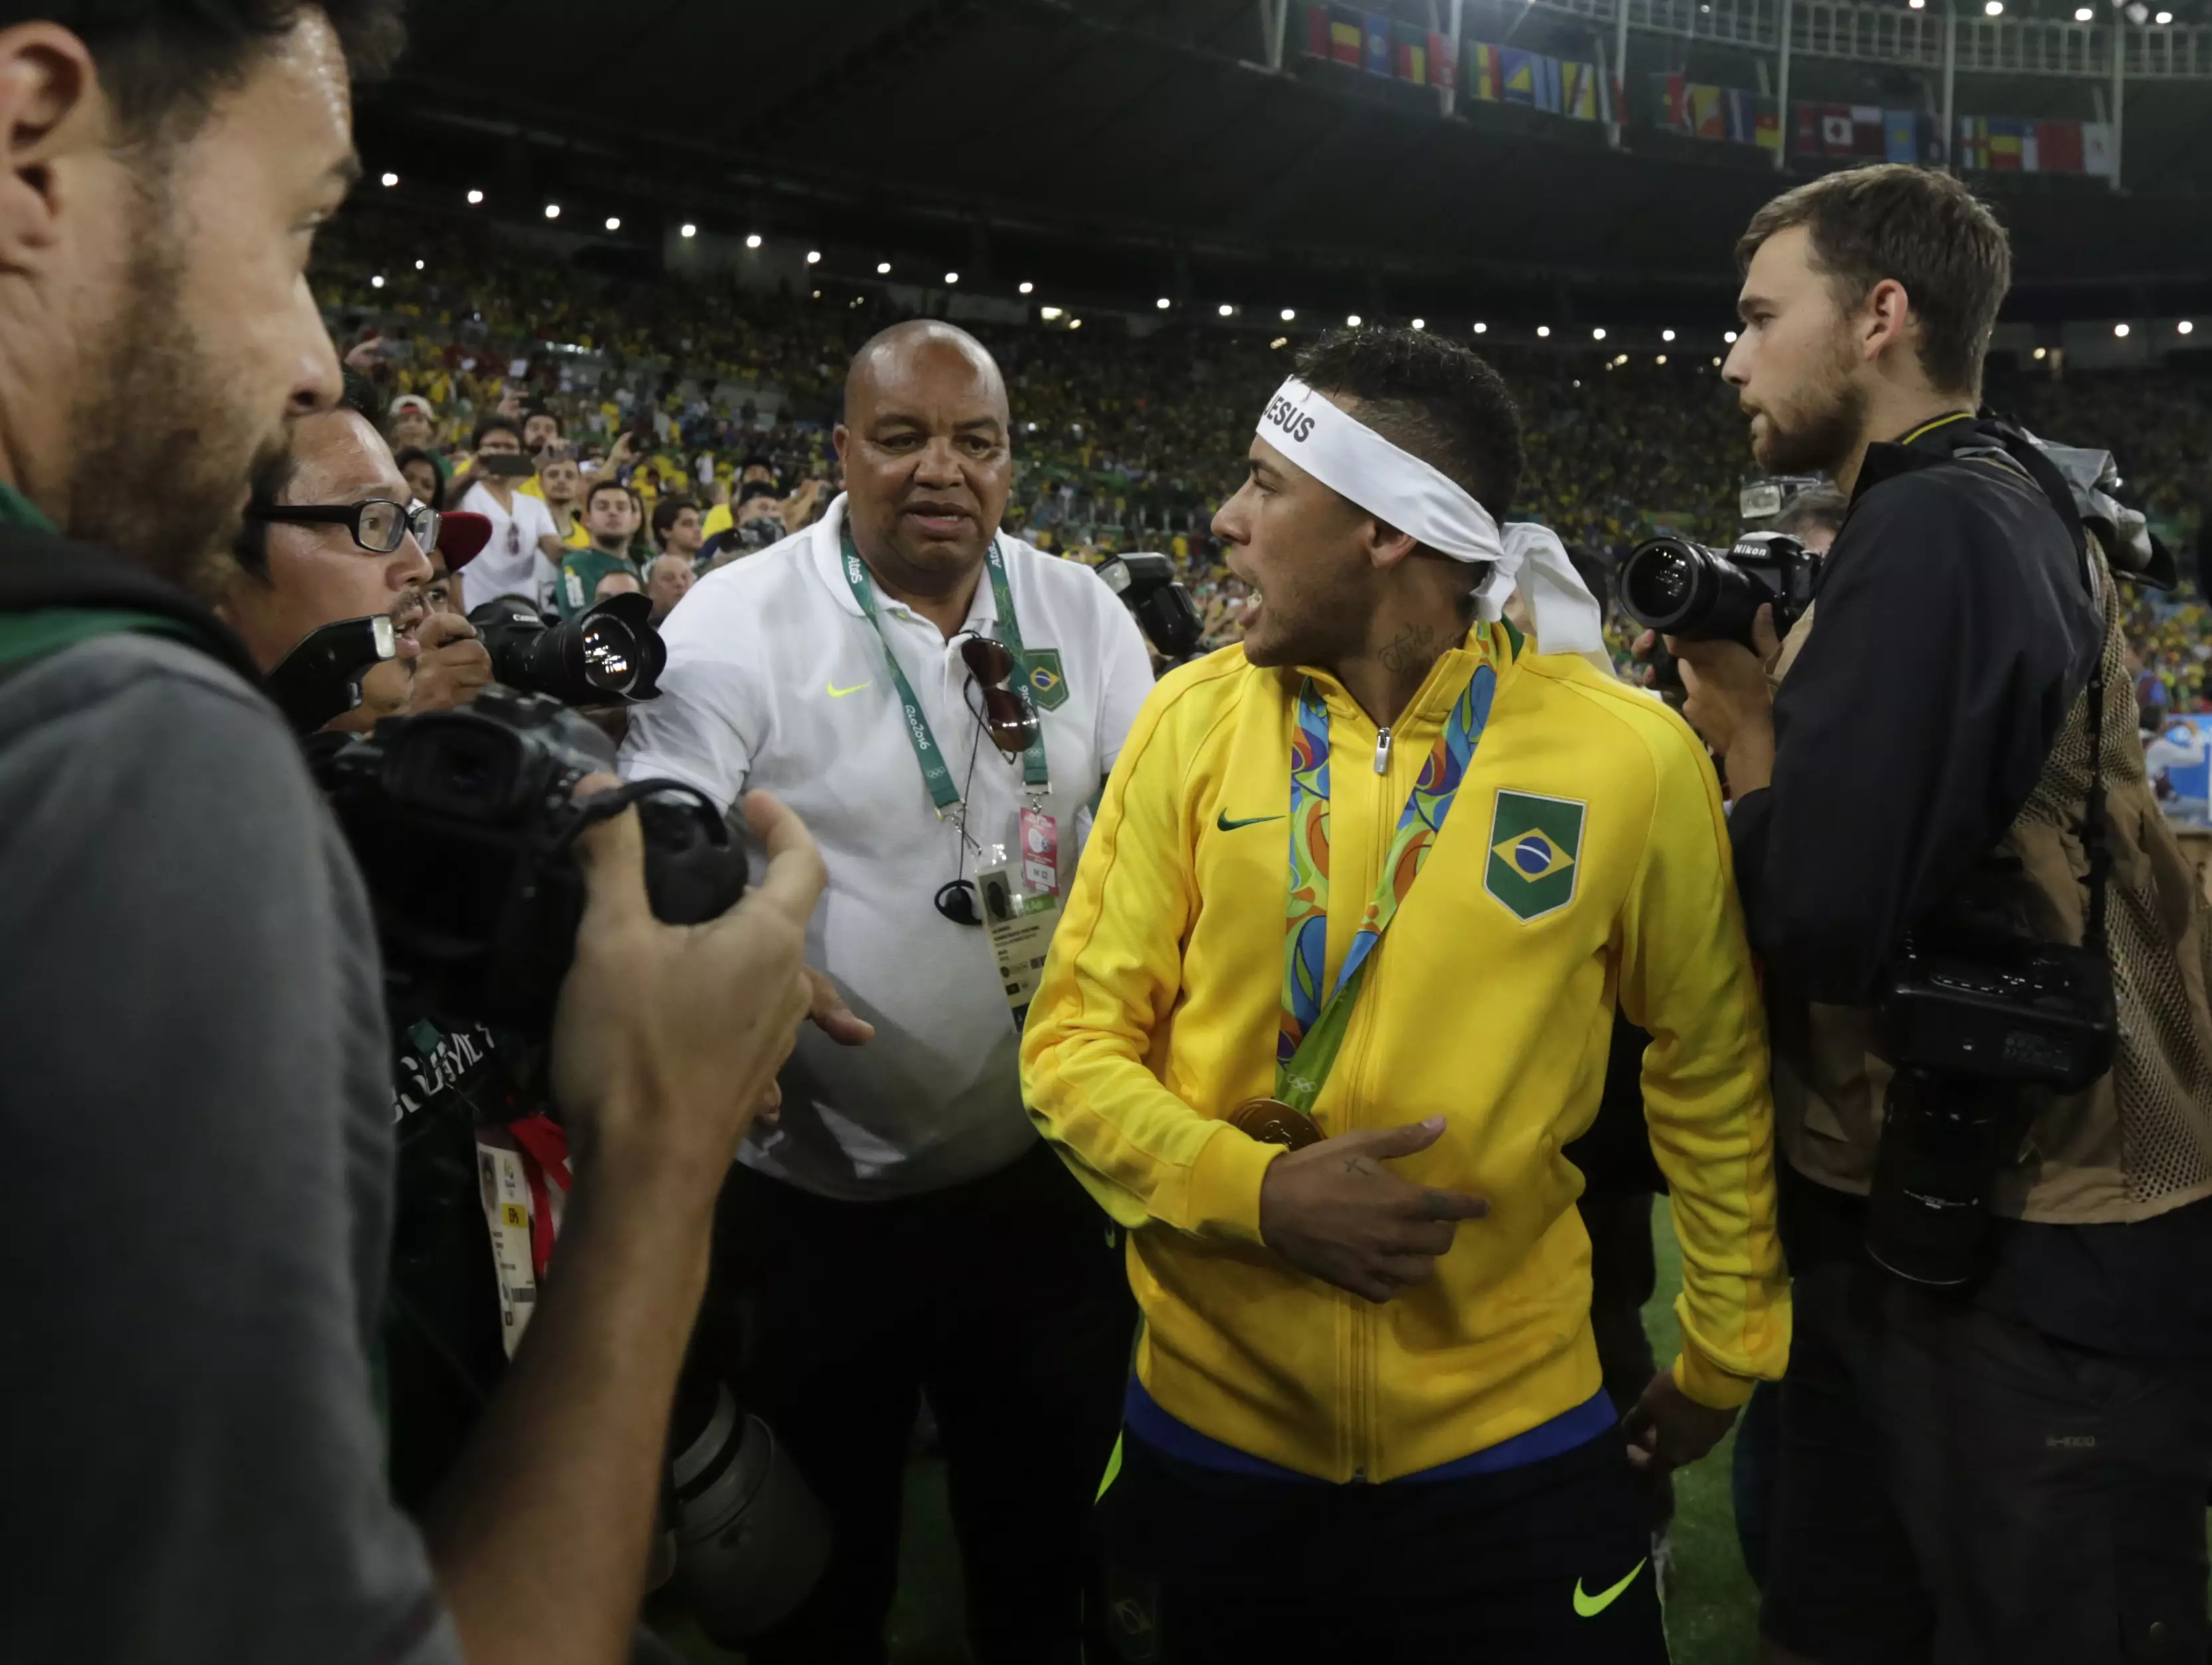 WATCH: Neymar Reacts Angrily To Brazil Fan After Winning Olympic Gold